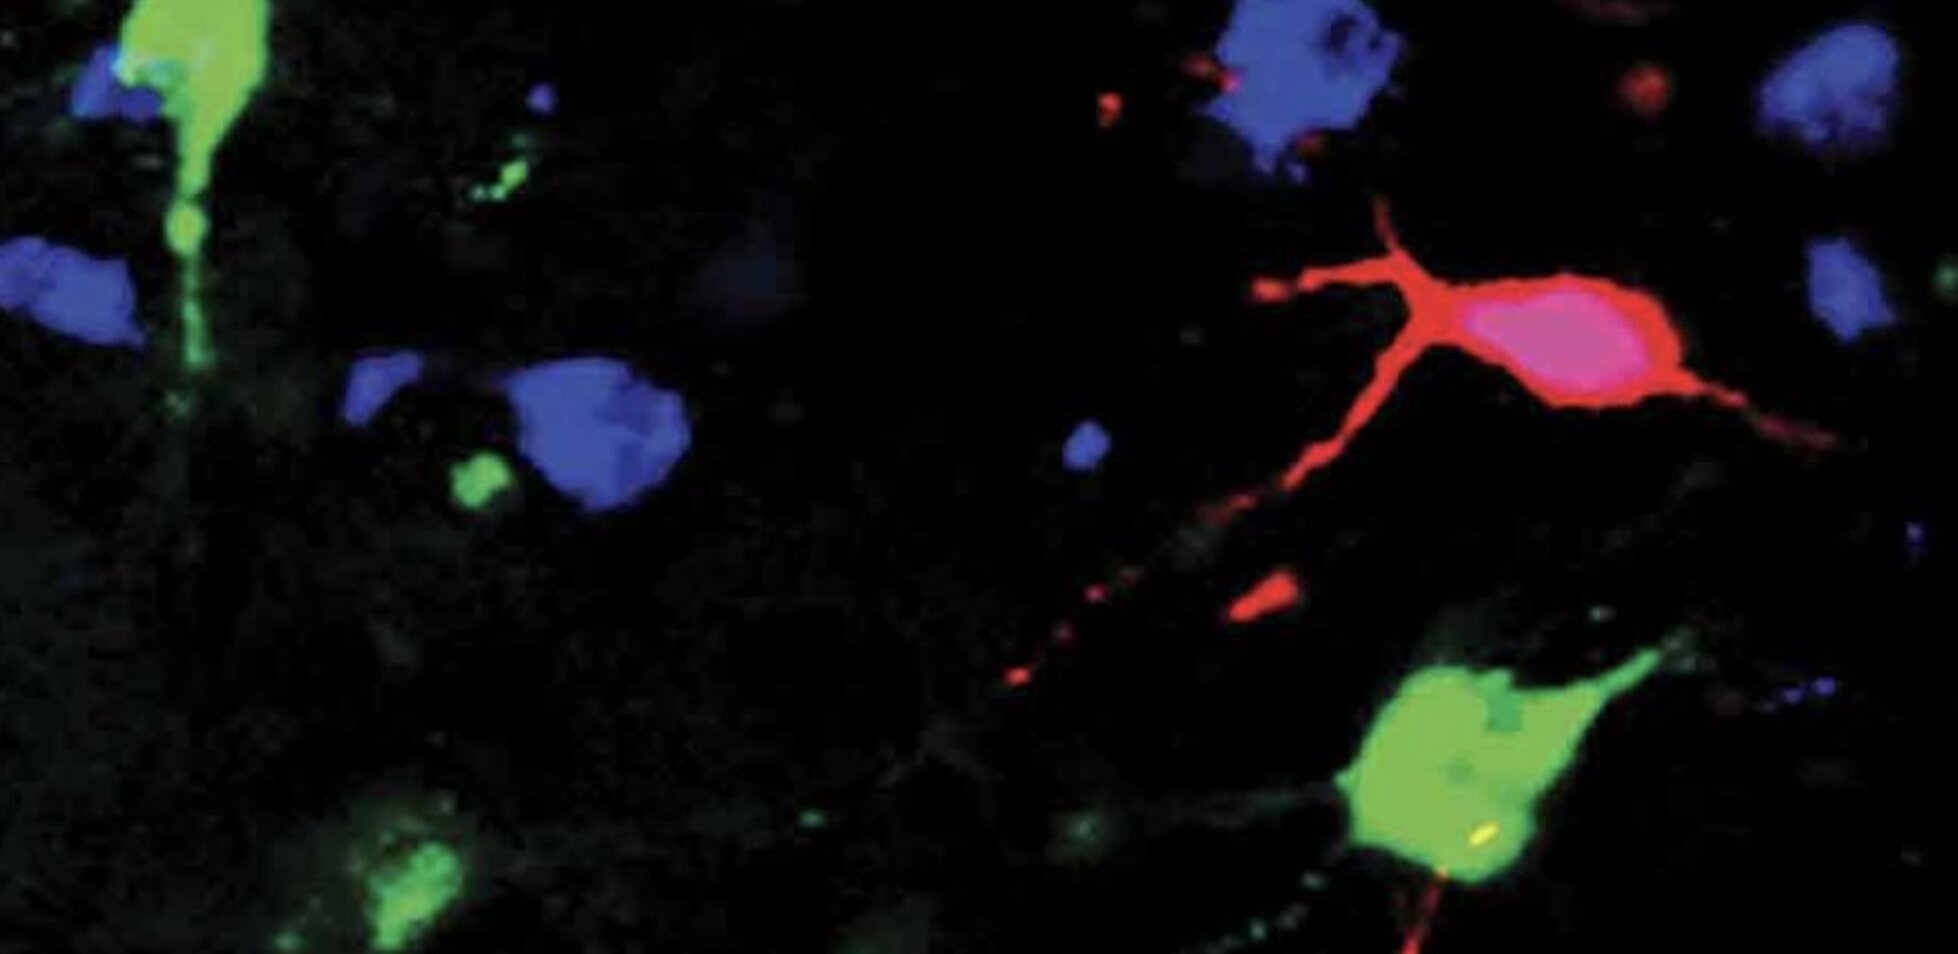 #Study shows orexin neurons can track how fast blood glucose changes